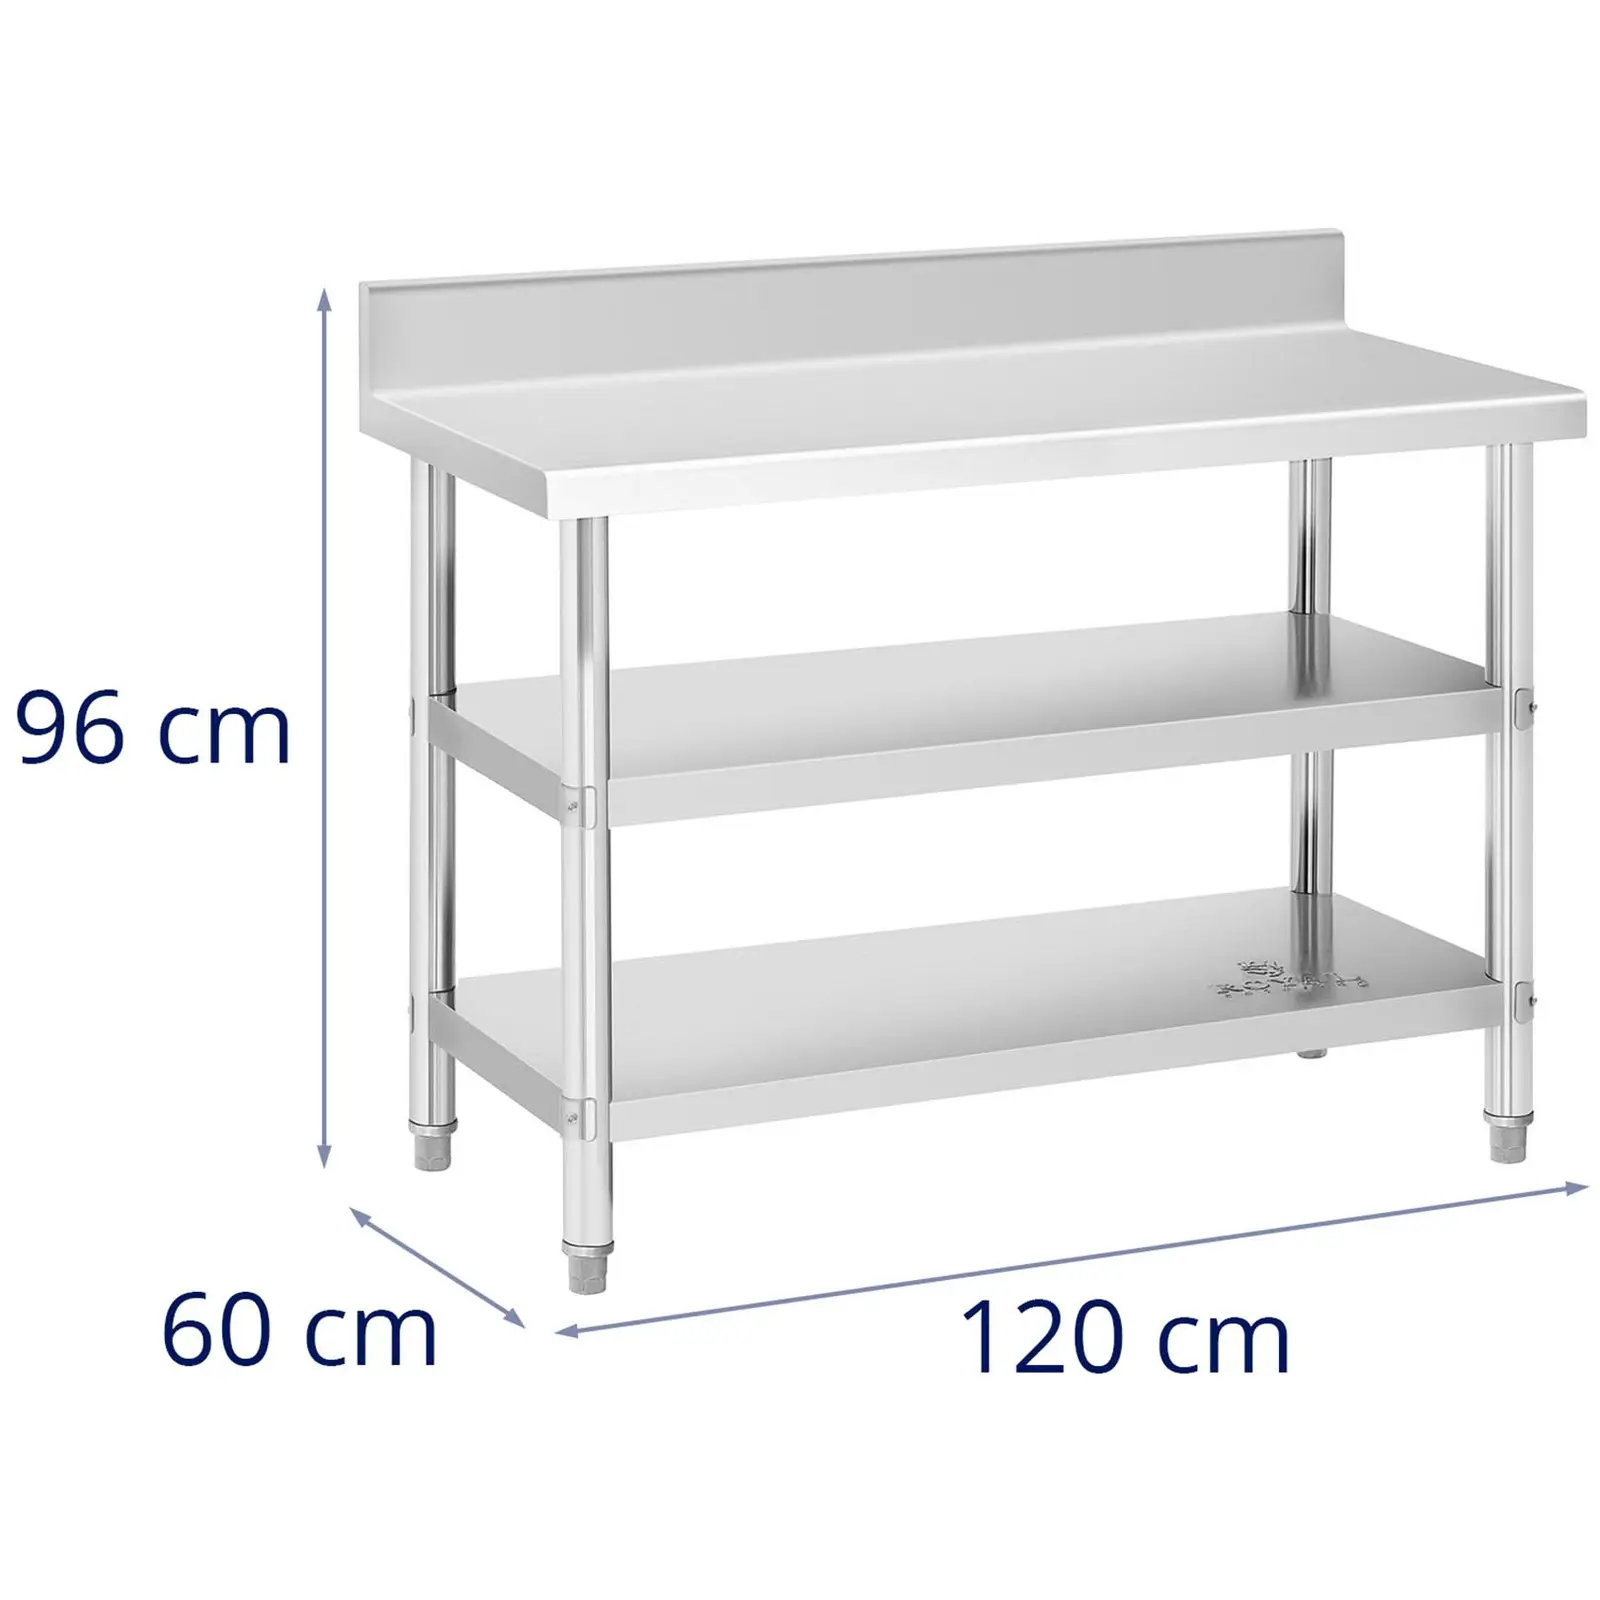 Stainless steel table with backsplash - 120 x 60 x 16.5 cm - 214 kg - 2 shelves - Royal Catering